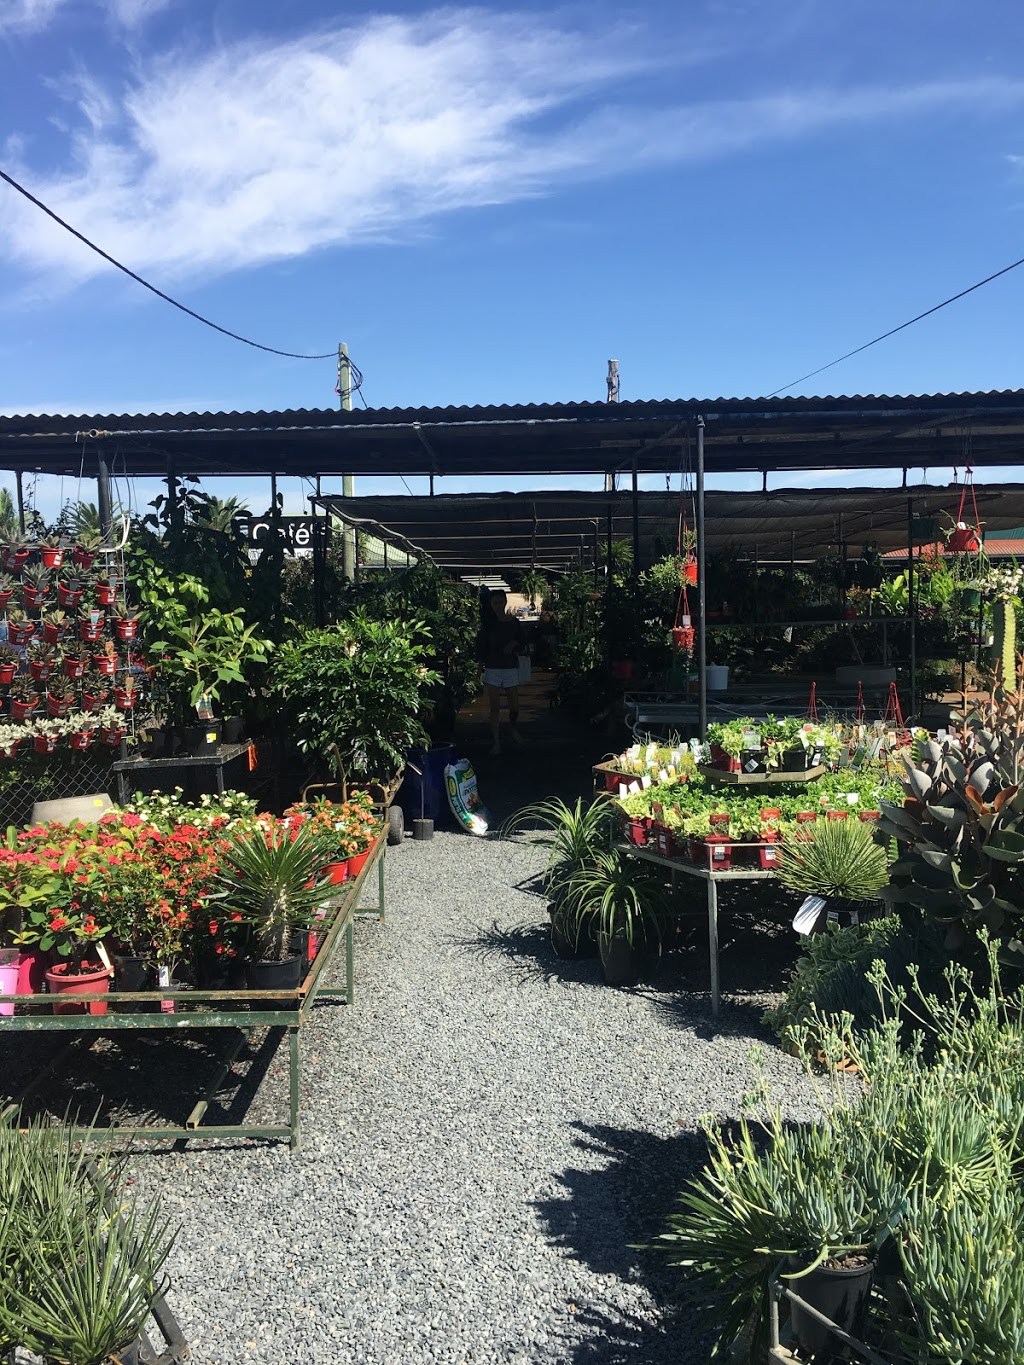 Ross Evans Garden Centre | store | 296-300 Oxley Dr, Runaway Bay QLD 4216, Australia | 0488010656 OR +61 488 010 656